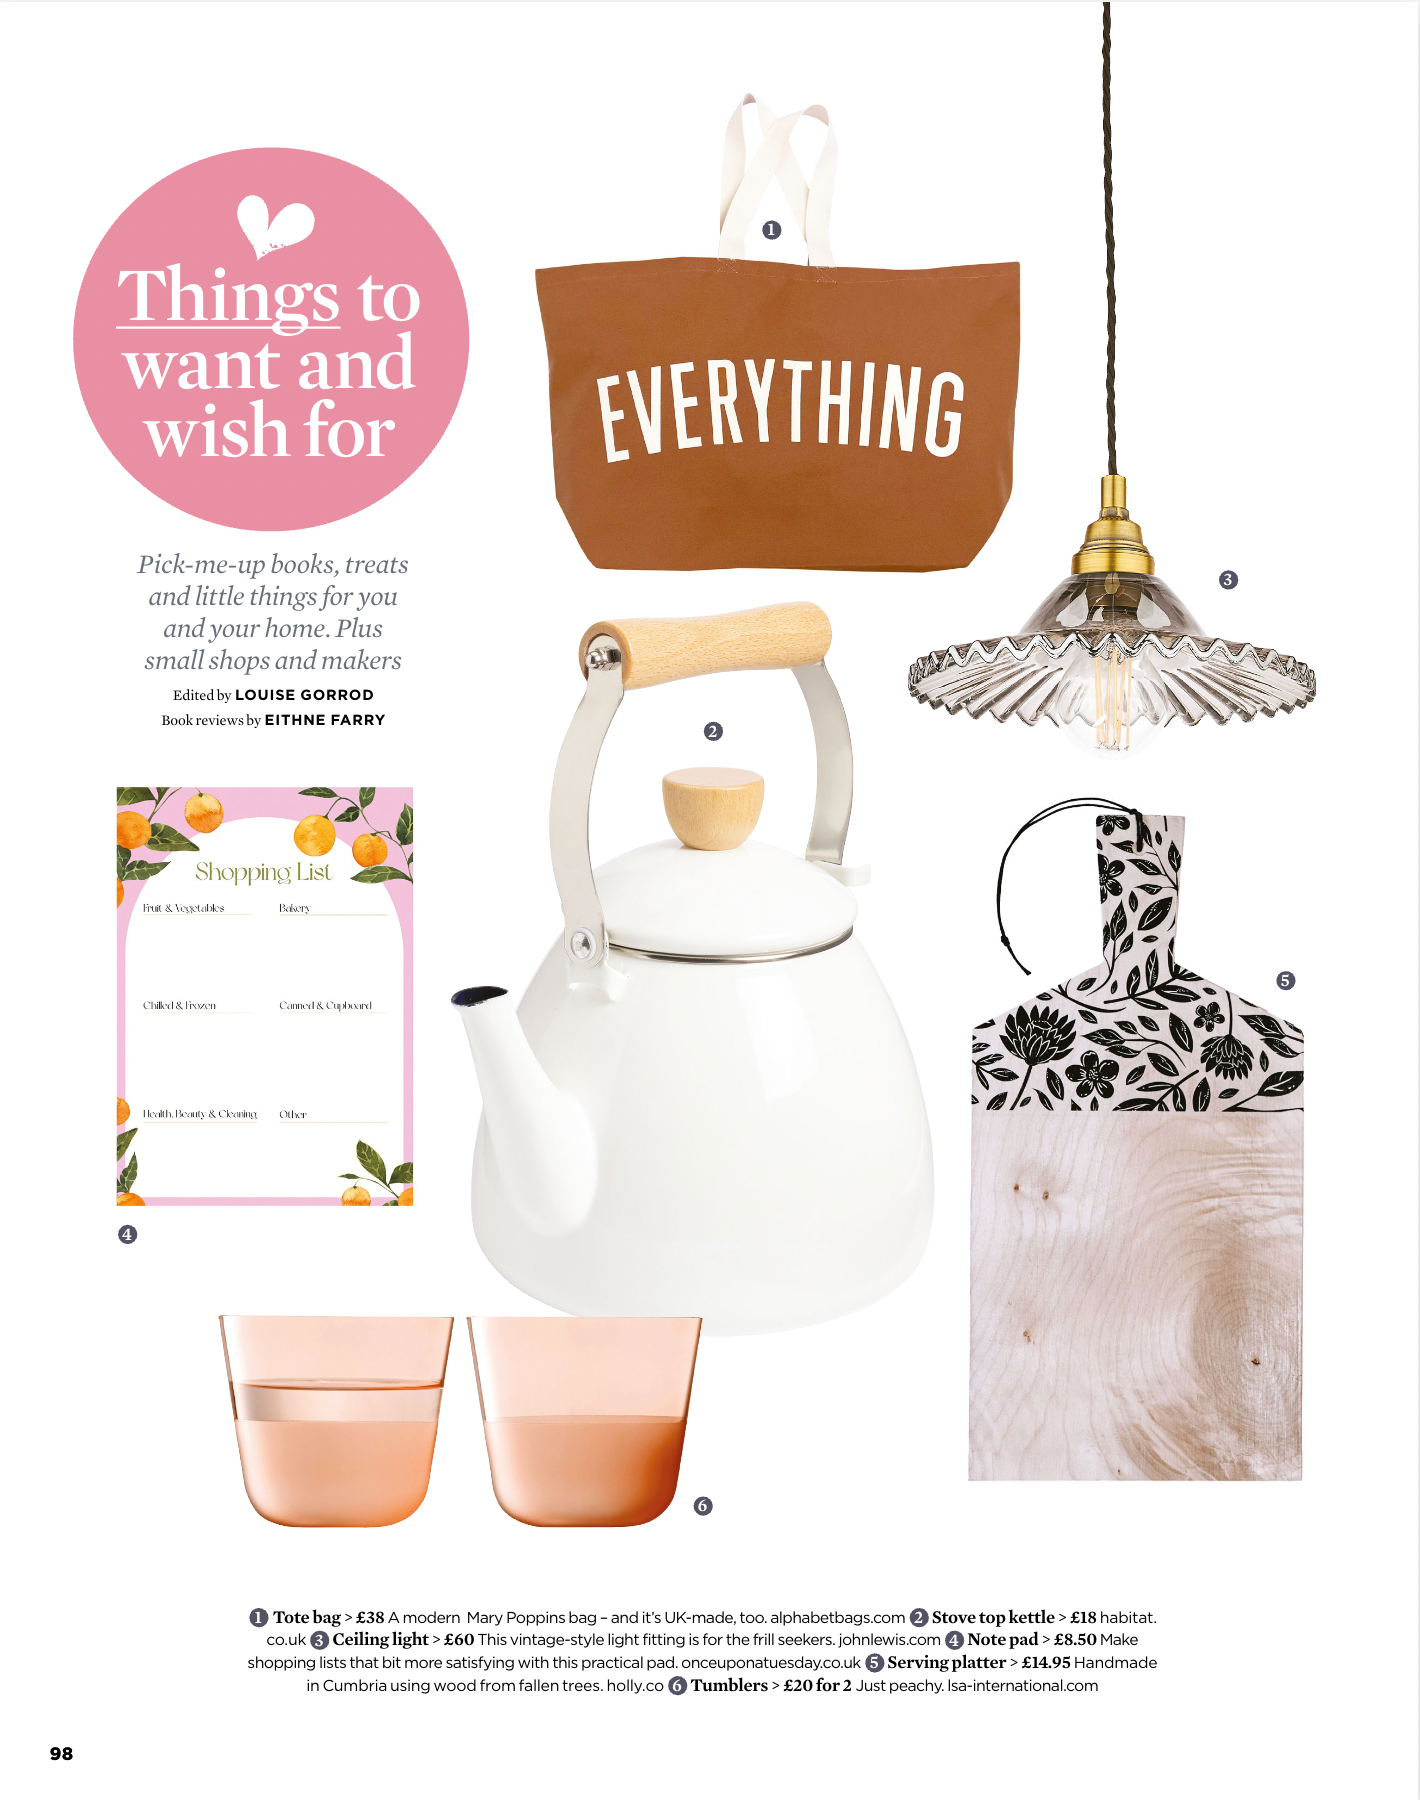 once upon a tuesday shopping list featured in The Simple Things wishlist